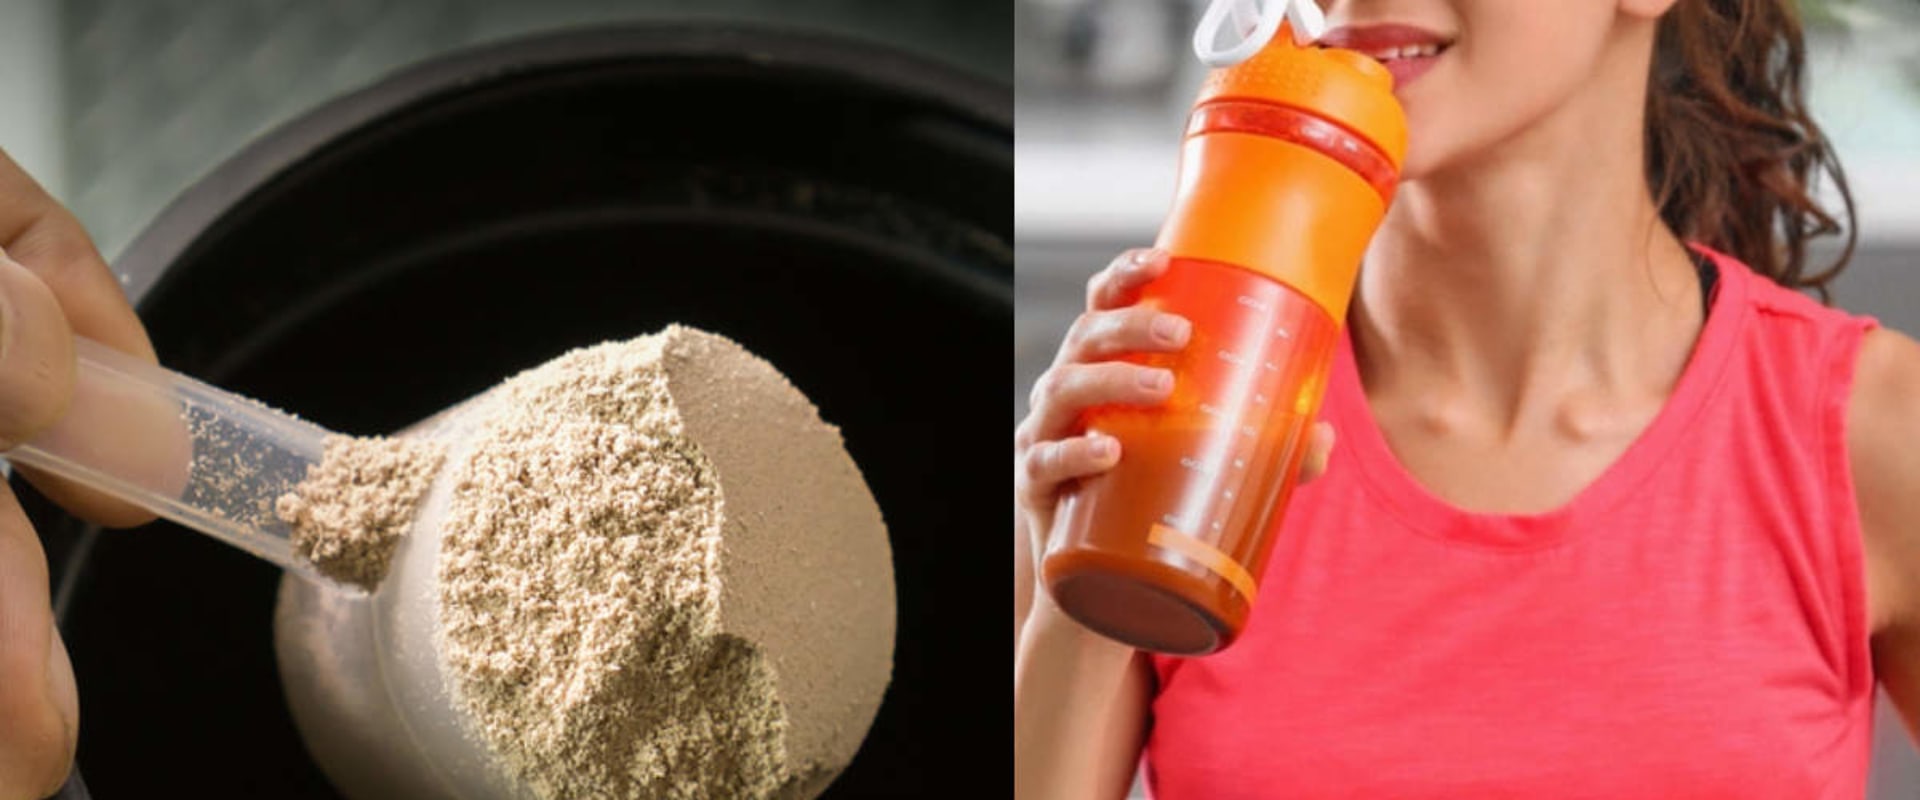 What can you mix protein powder into?